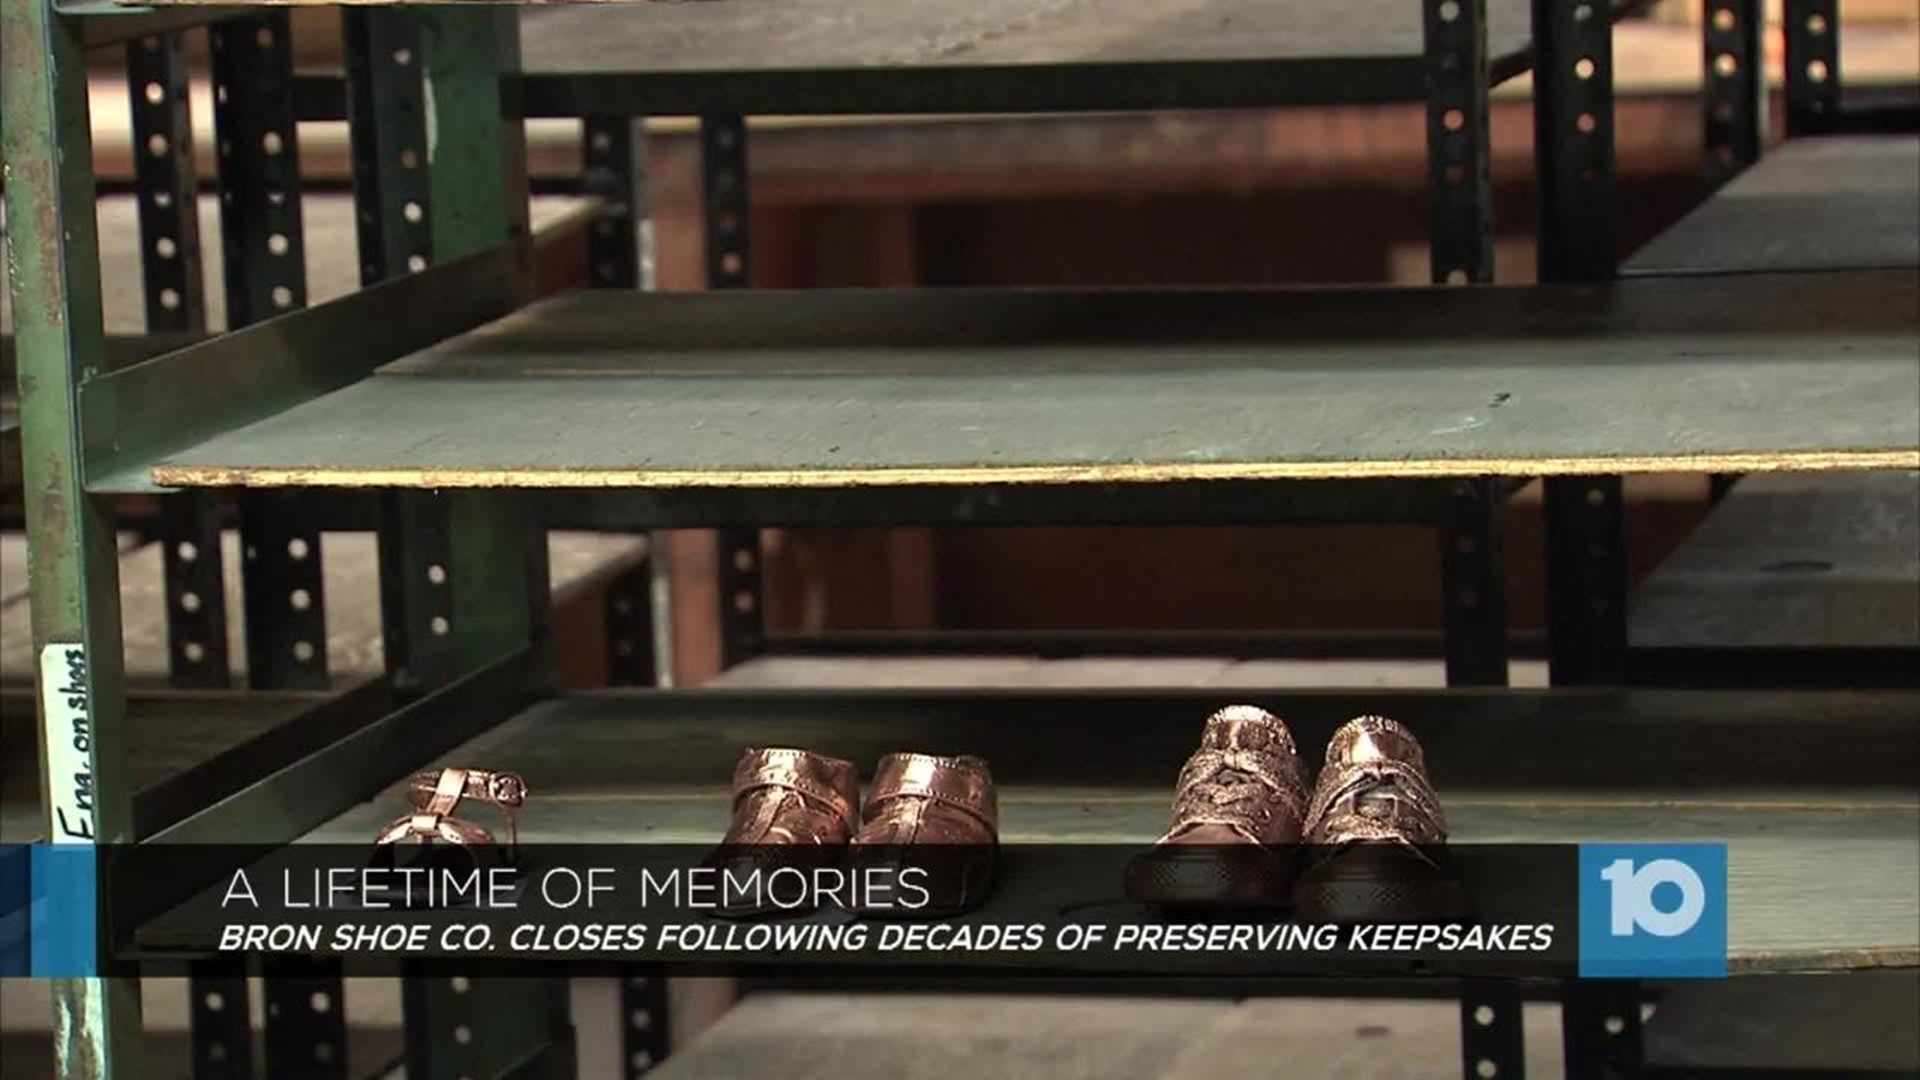 Business closing after preserving memories for 80 years